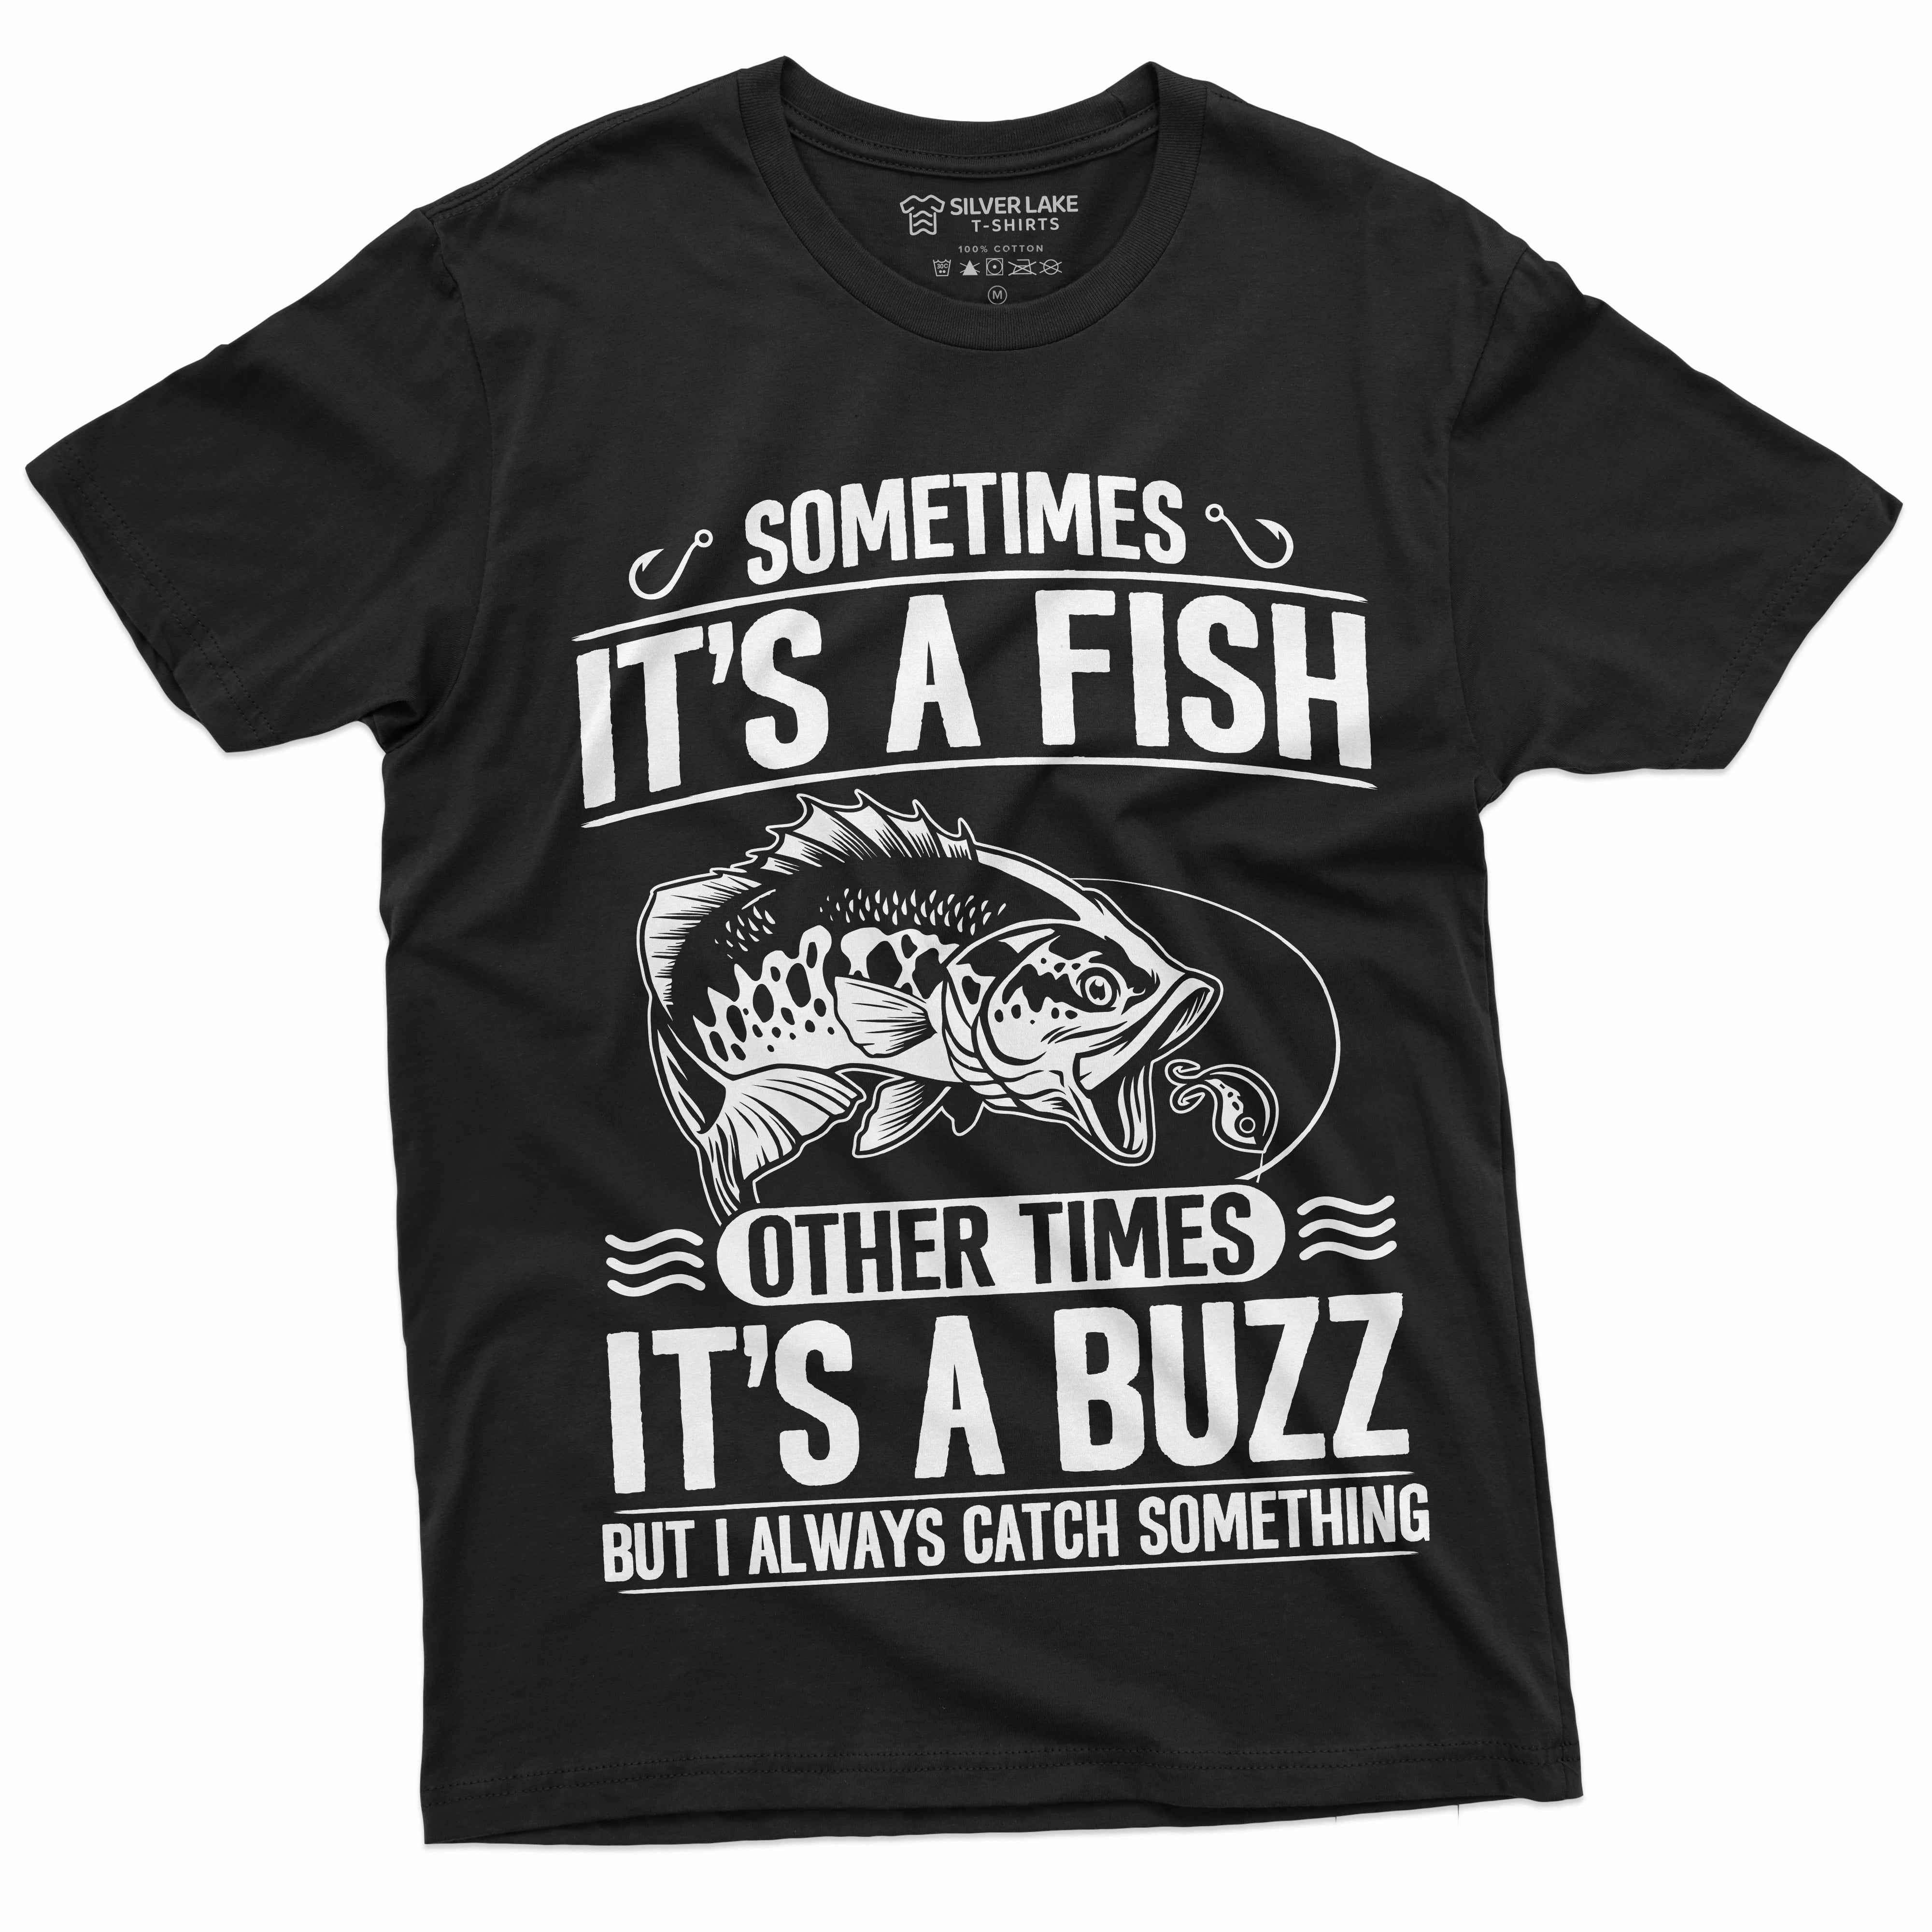 Men's Funny Fishing Shirt I only Fish Humor Tee Fathers Day Nature Camping  Tee 